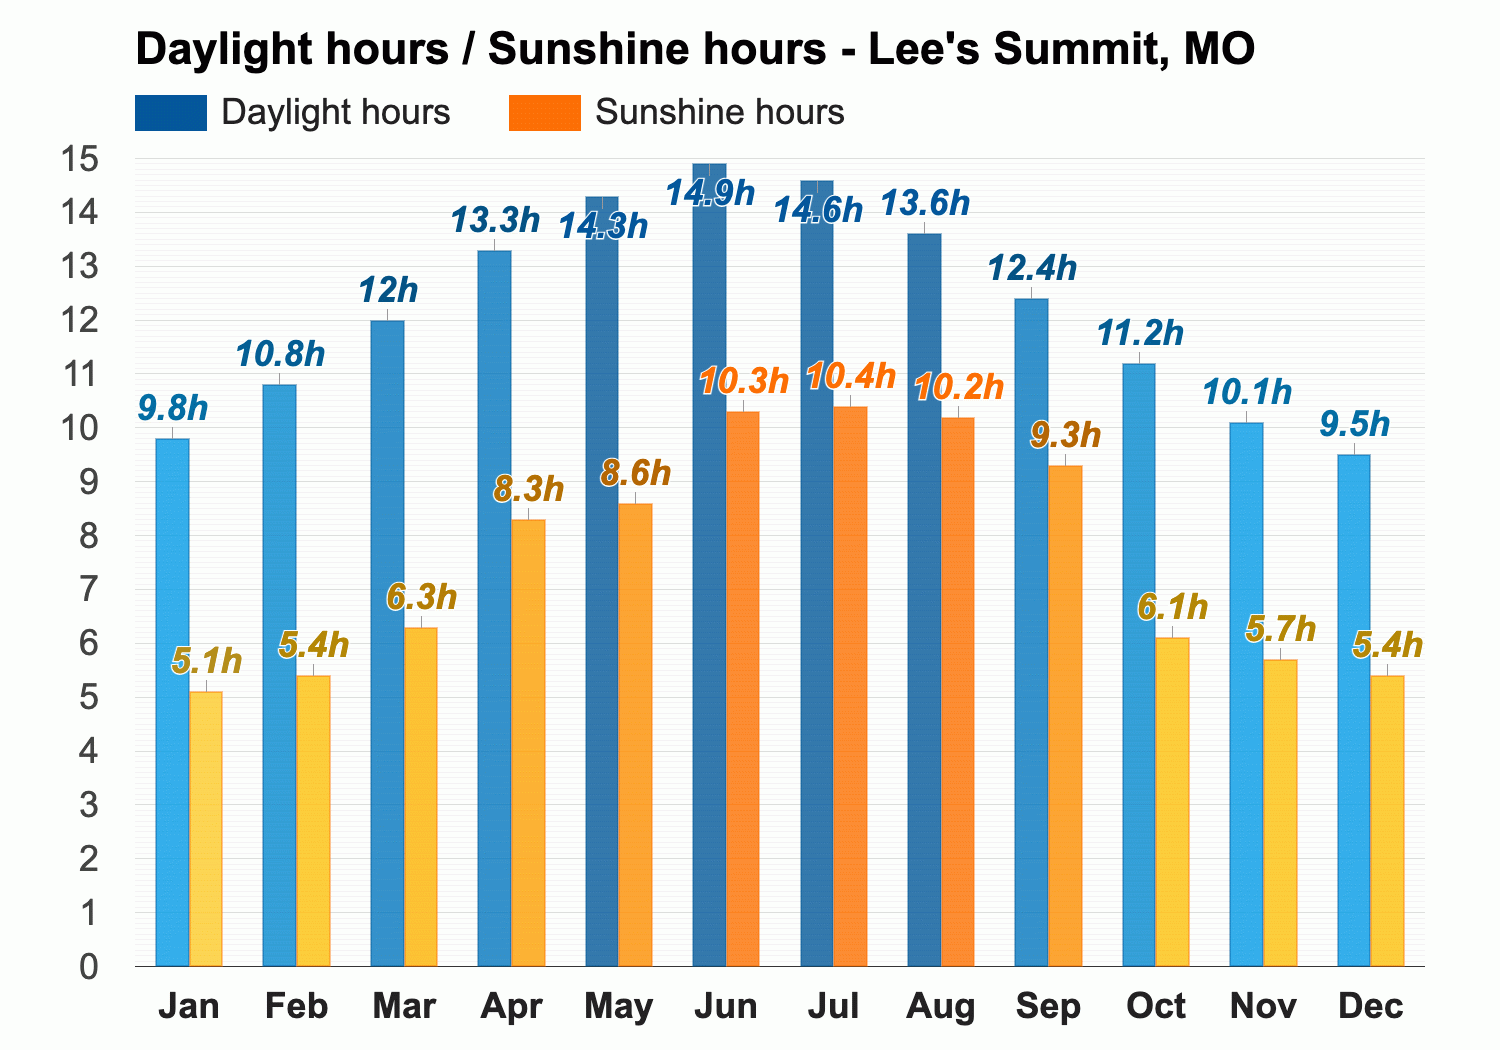 Lee's Summit, MO - Climate & Monthly weather forecast